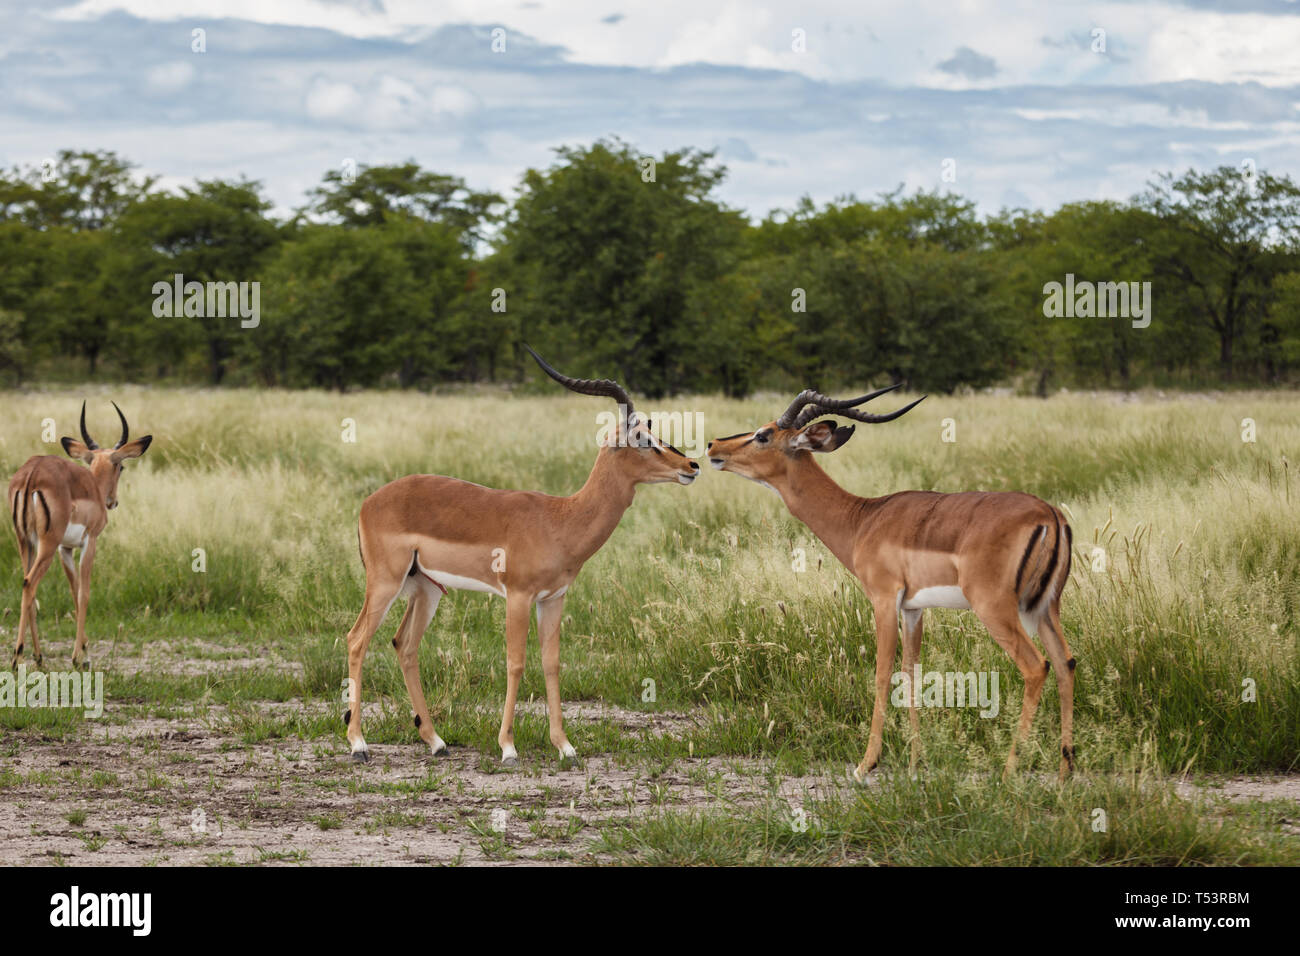 Two springbok antelope study each other giving photographer good side view while third walks away Stock Photo